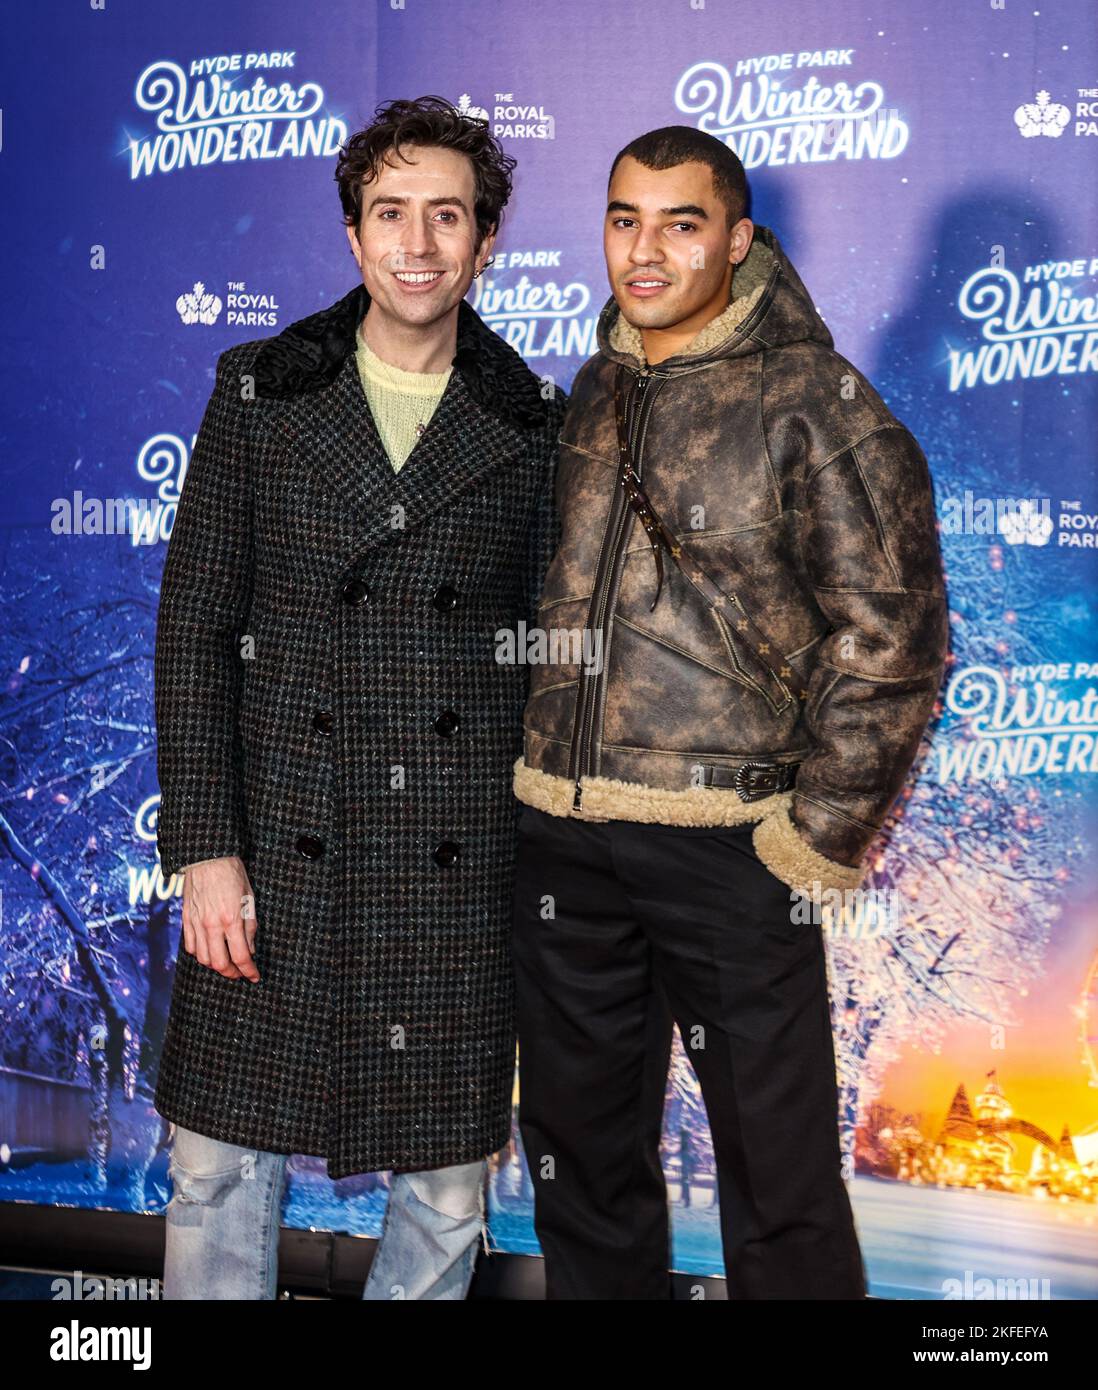 London, UK. 17th Nov, 2022. Nick Grimshaw and Meshach Henry attend the launch night for Hyde Park Winter Wonderland 2022 in London. (Photo by Brett Cove/SOPA Images/Sipa USA) Credit: Sipa USA/Alamy Live News Stock Photo